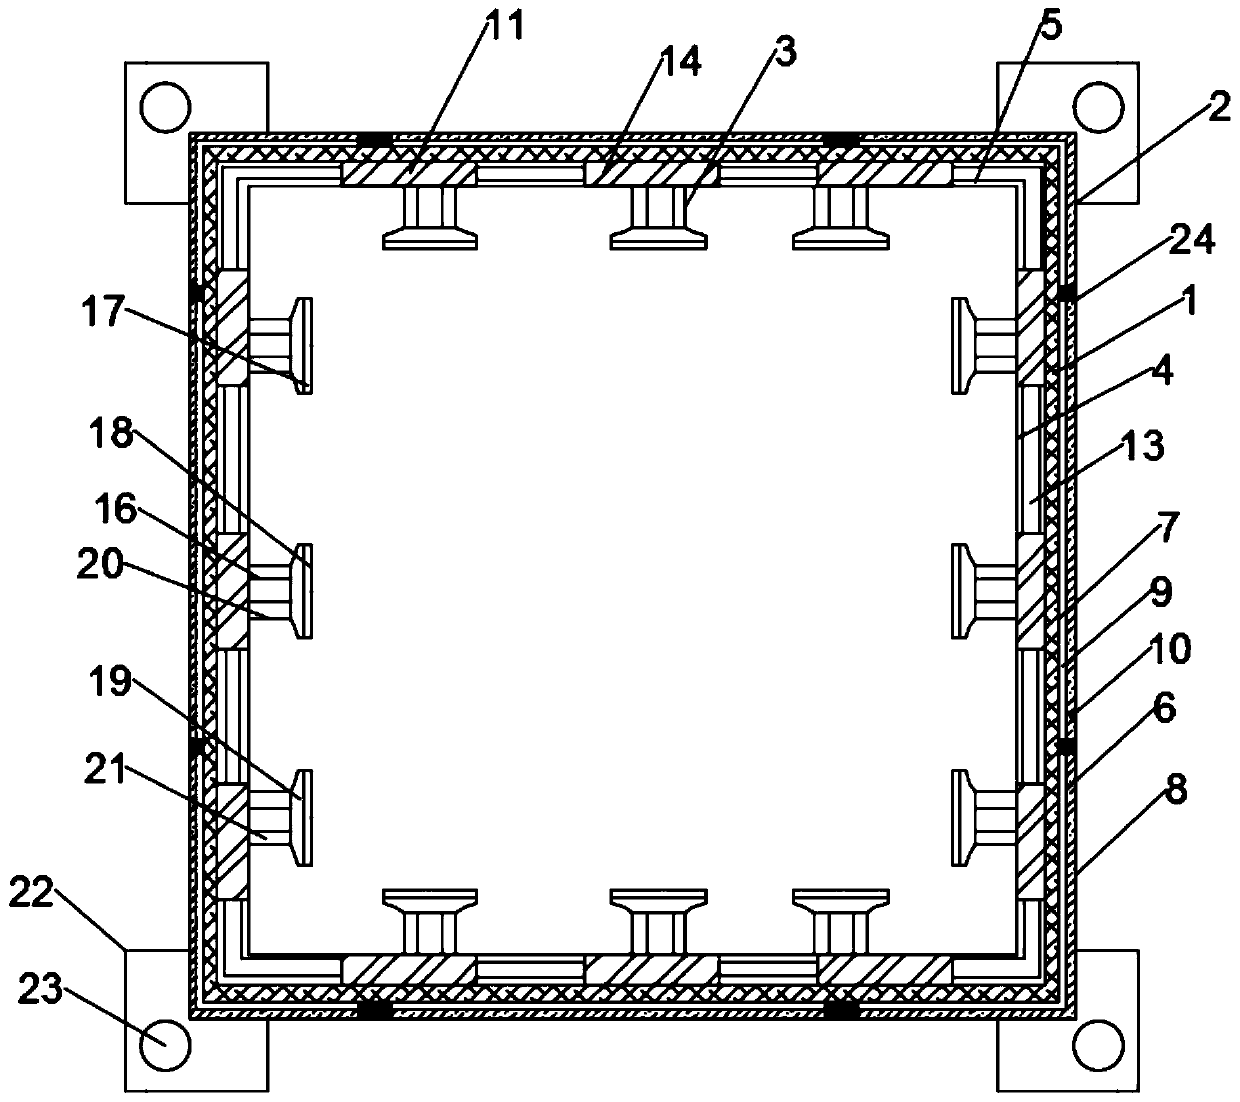 An electromechanical heat insulation and fire protection device